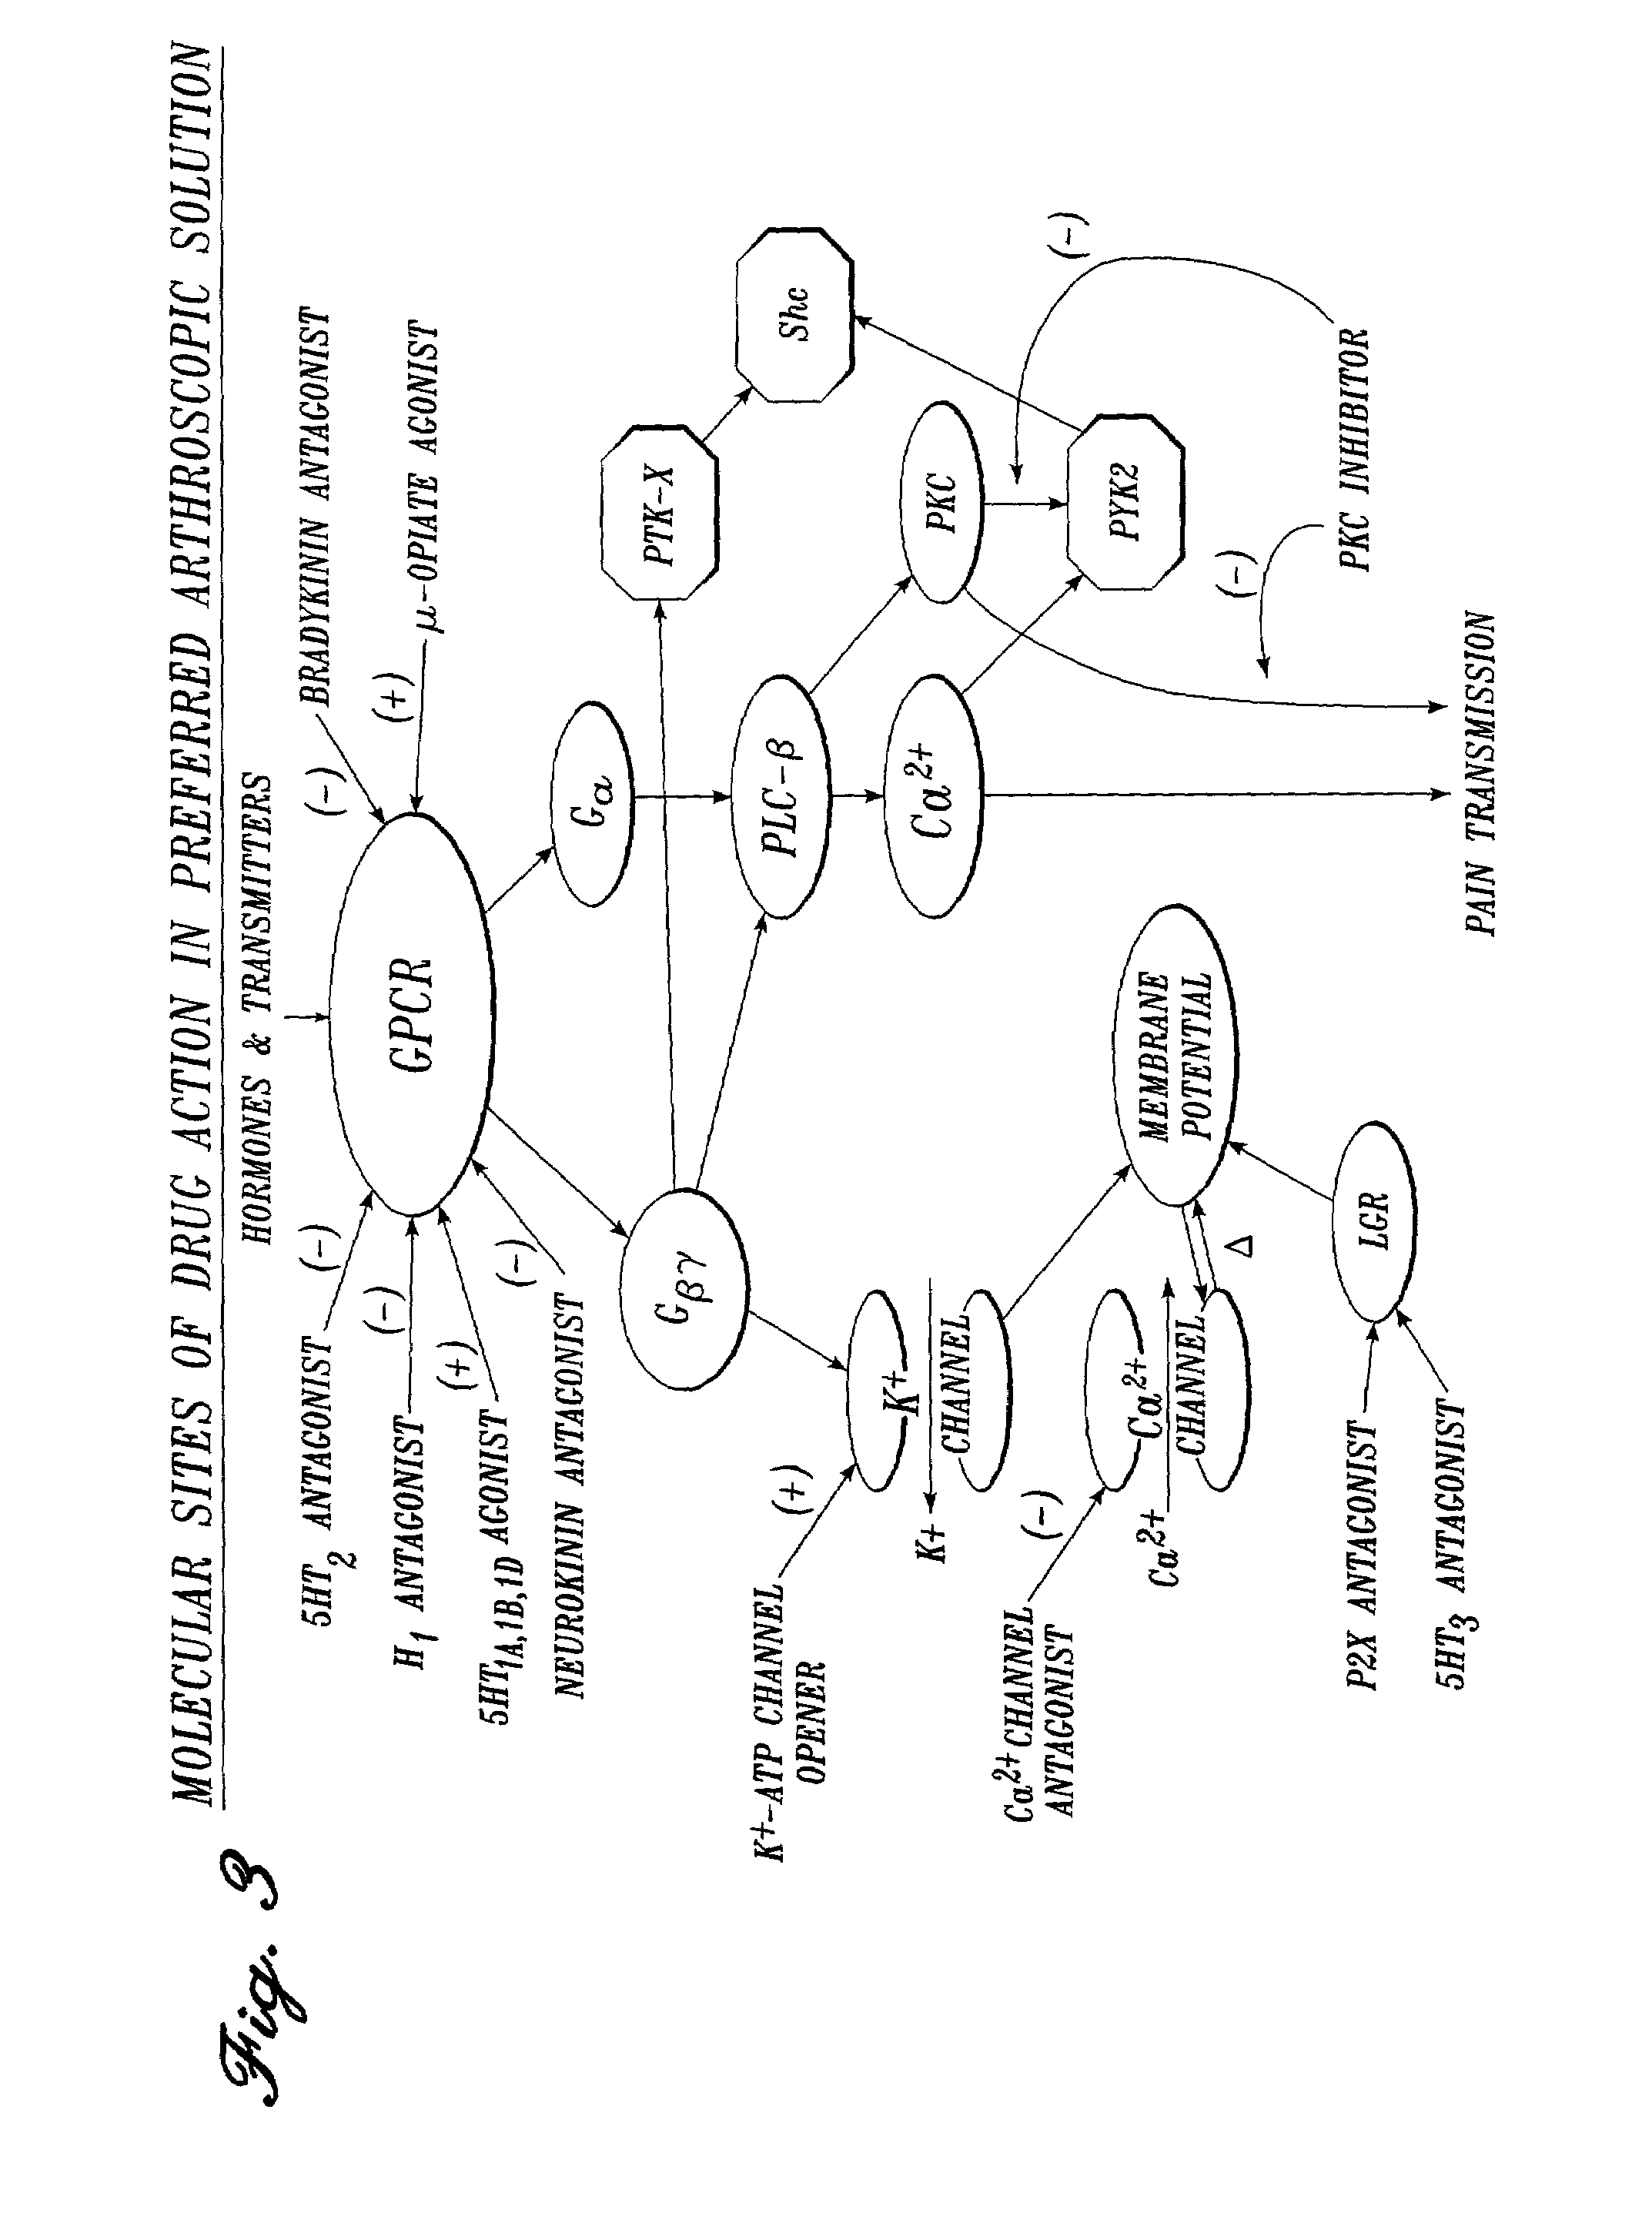 Method of inhibition of pain and inflammation during surgery comprising administration of soluble TNF receptors